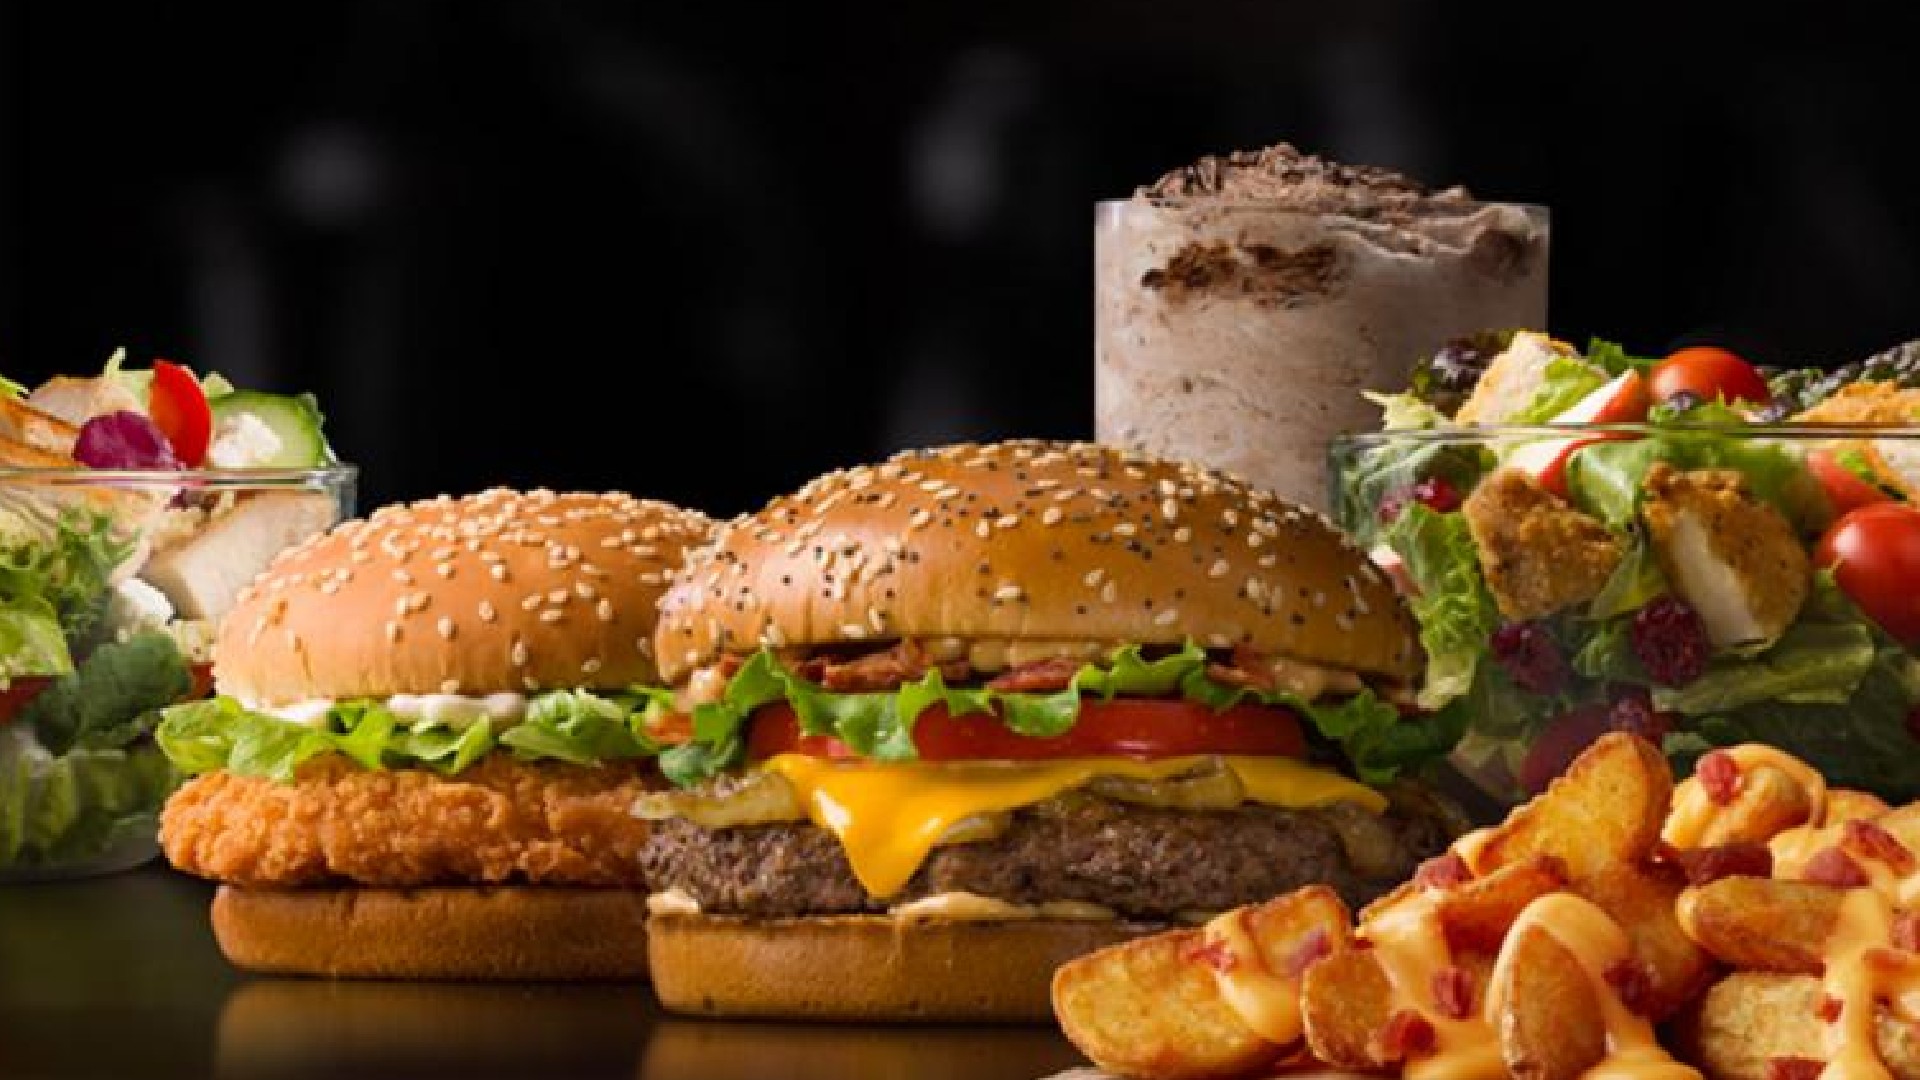 Foodies! McDonald’s Launched 3-Piece Meals At Just ₹99 & We Can’t Keep